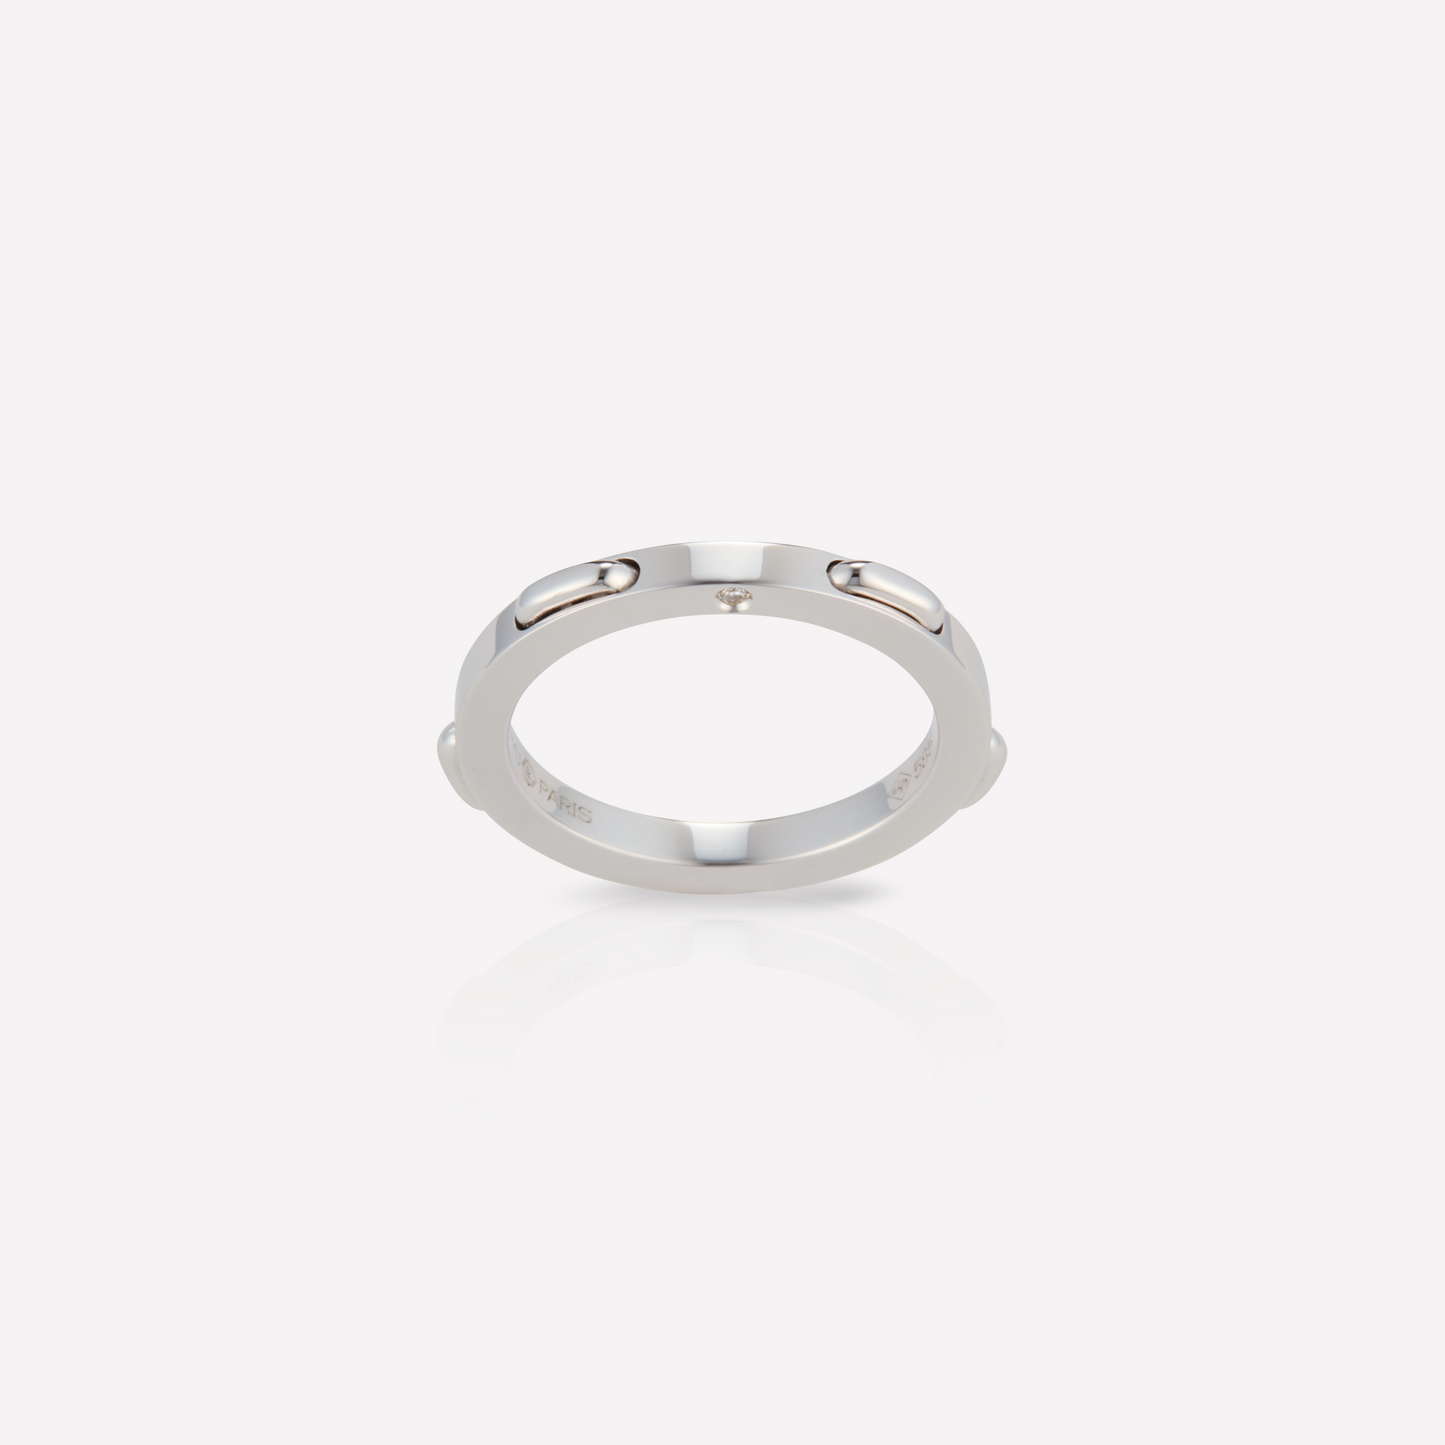 Twined 2,5 Bague, Diamant